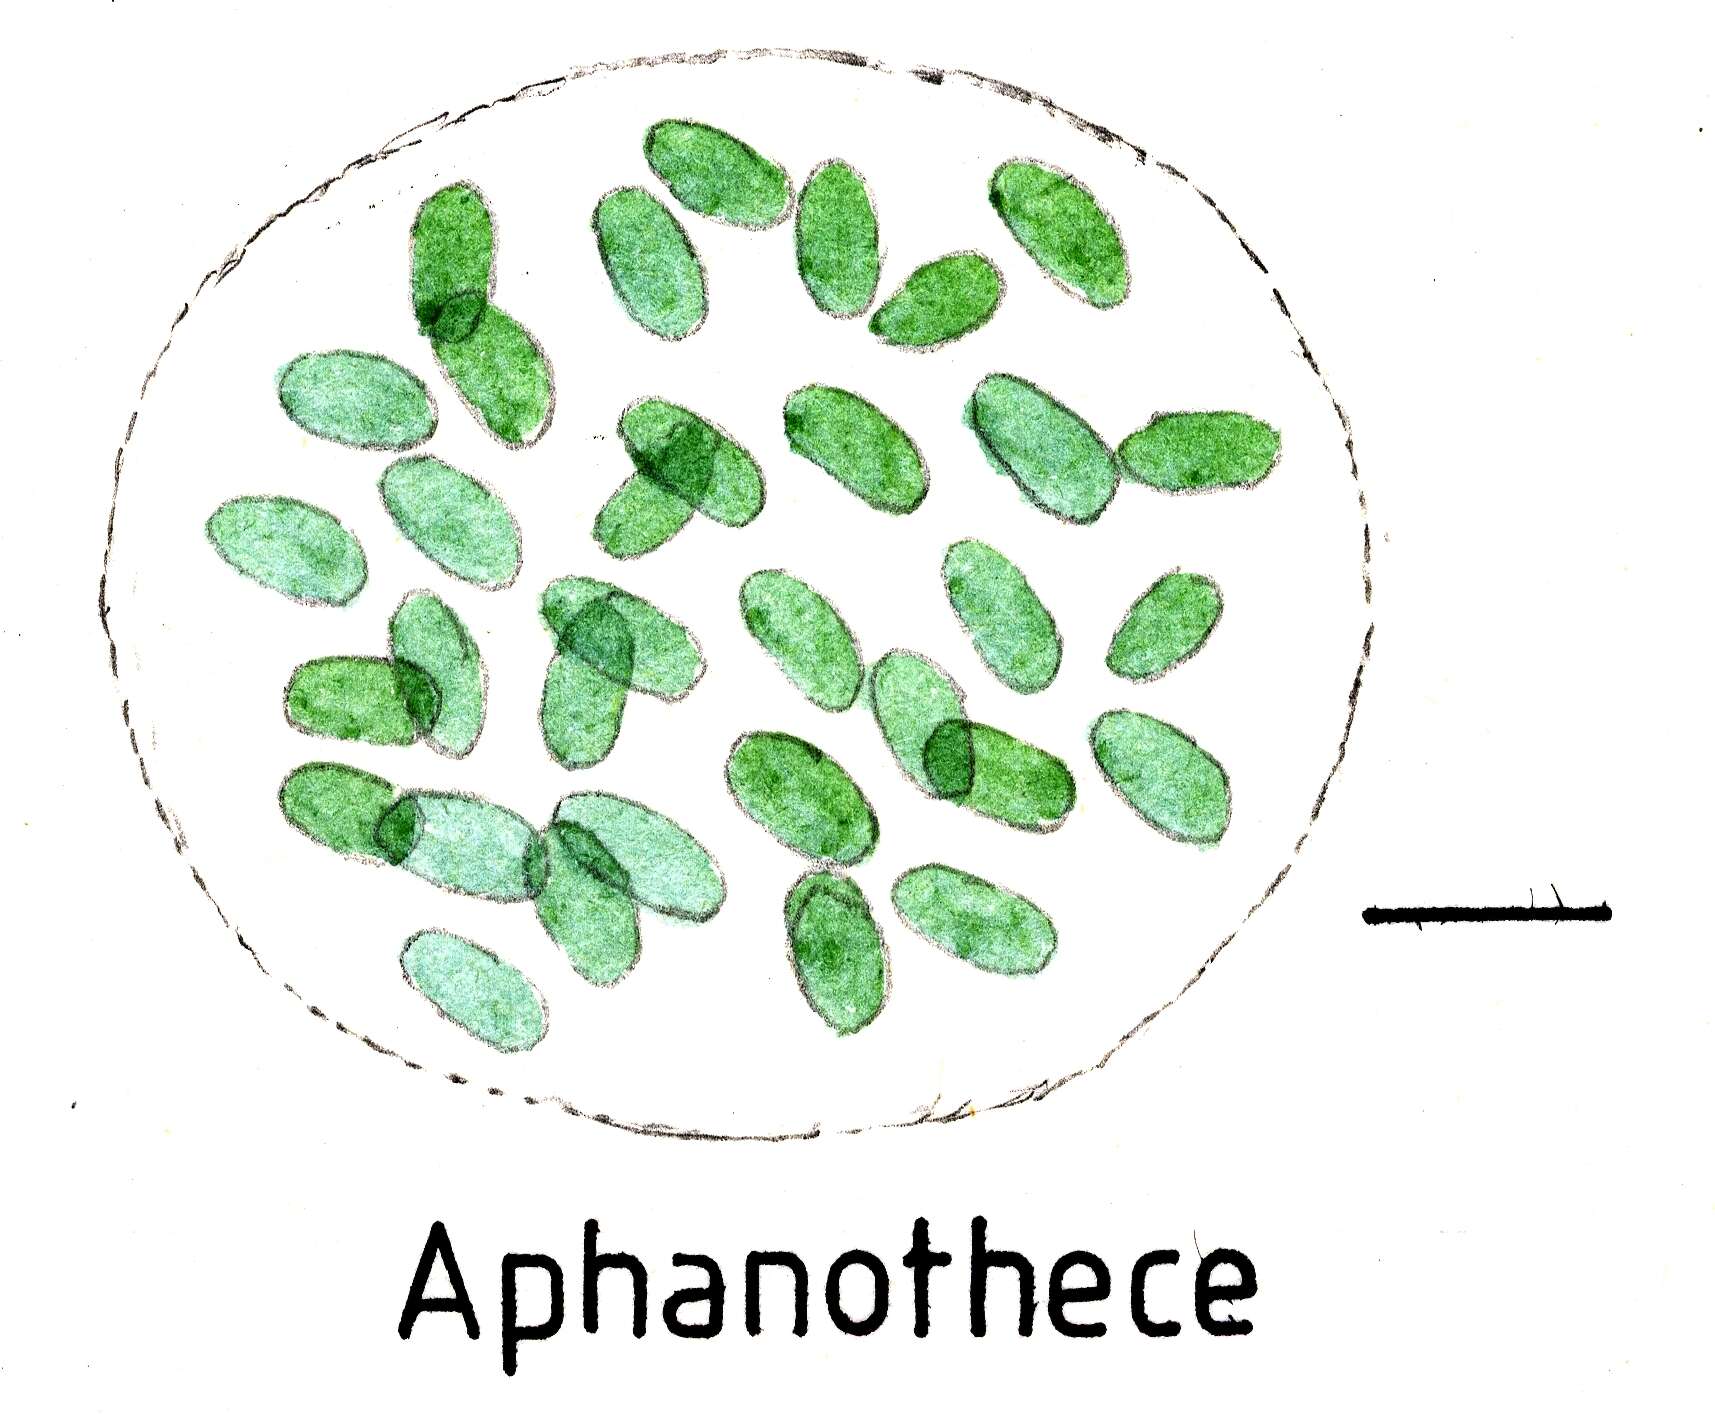 Image of Aphanothecaceae